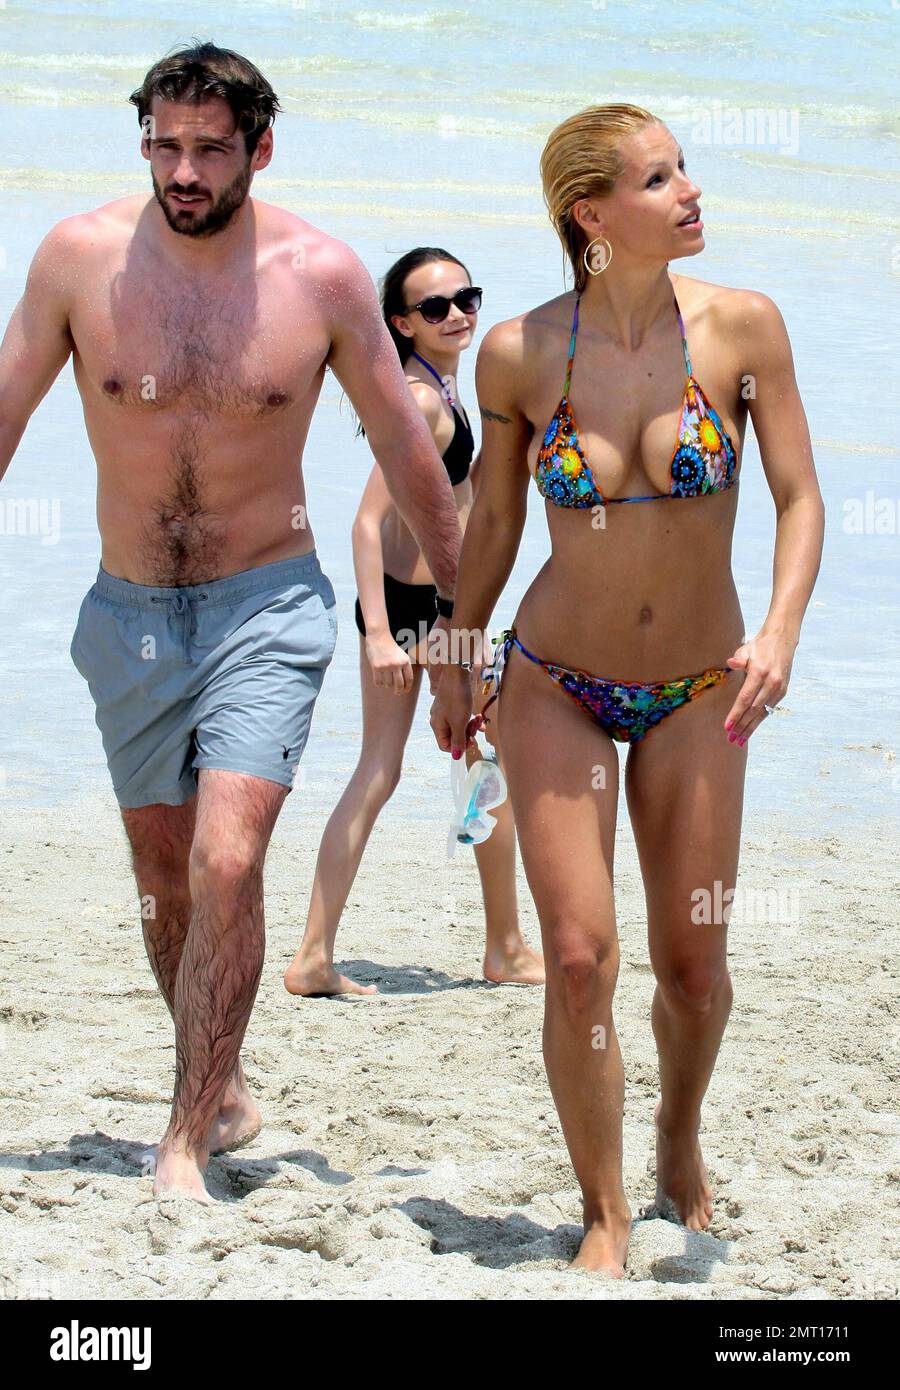 Swiss TV host and actress Michelle Hunziker spends the day in Miami Beach with boyfriend Tomaso Trussardi. 35 year old Hunziker wore a multi-color string bikini that showed off her amazing toned figure. The couple were seen taking a dip in the ocean, sharing a kiss and happily walking hand-in-hand. Miami Beach, FL. 3rd June 2012. . Stock Photo